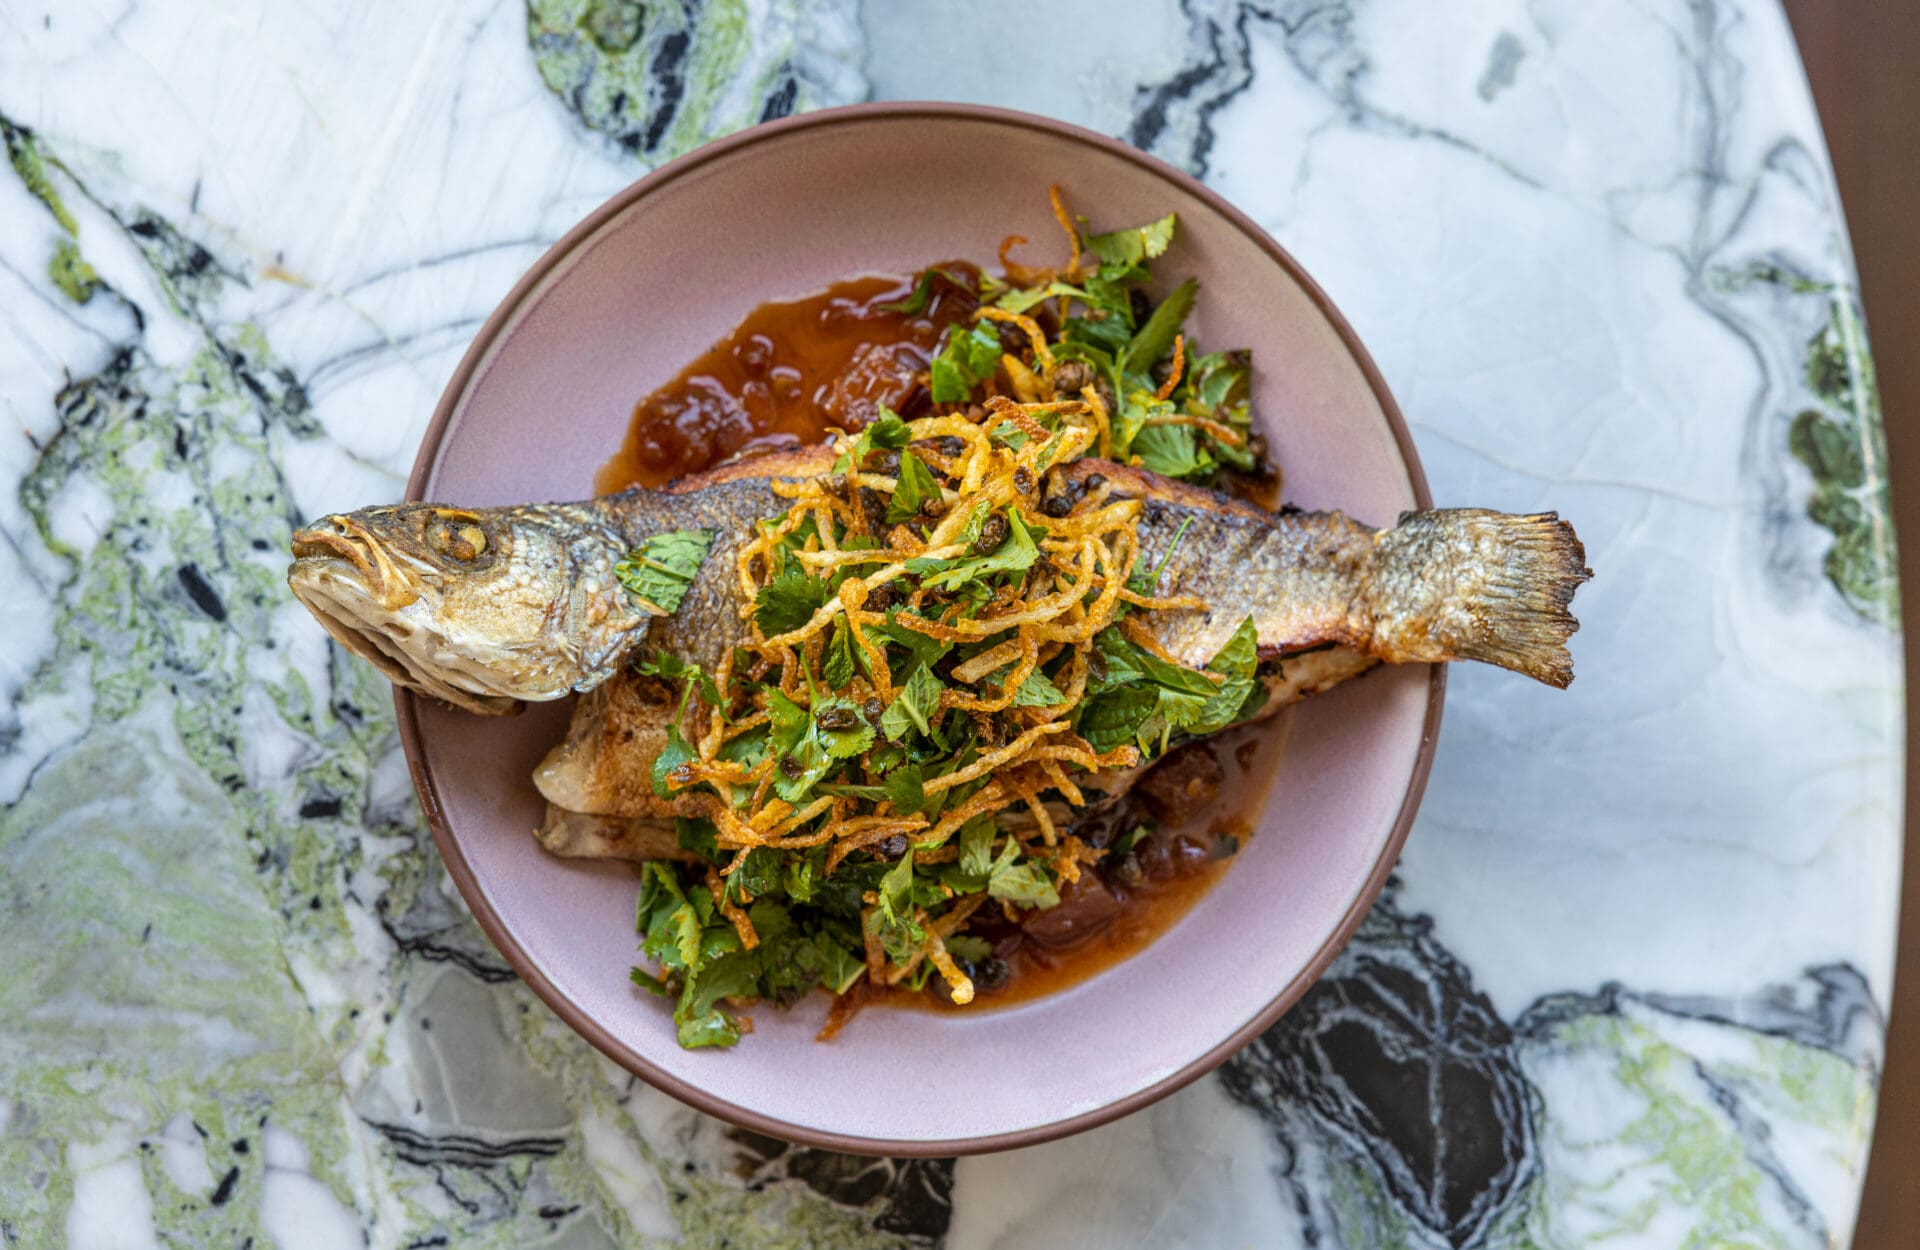 Best LA restaurants | a crispy fried fish topped with onions at Cabra at The Hoxton in LA